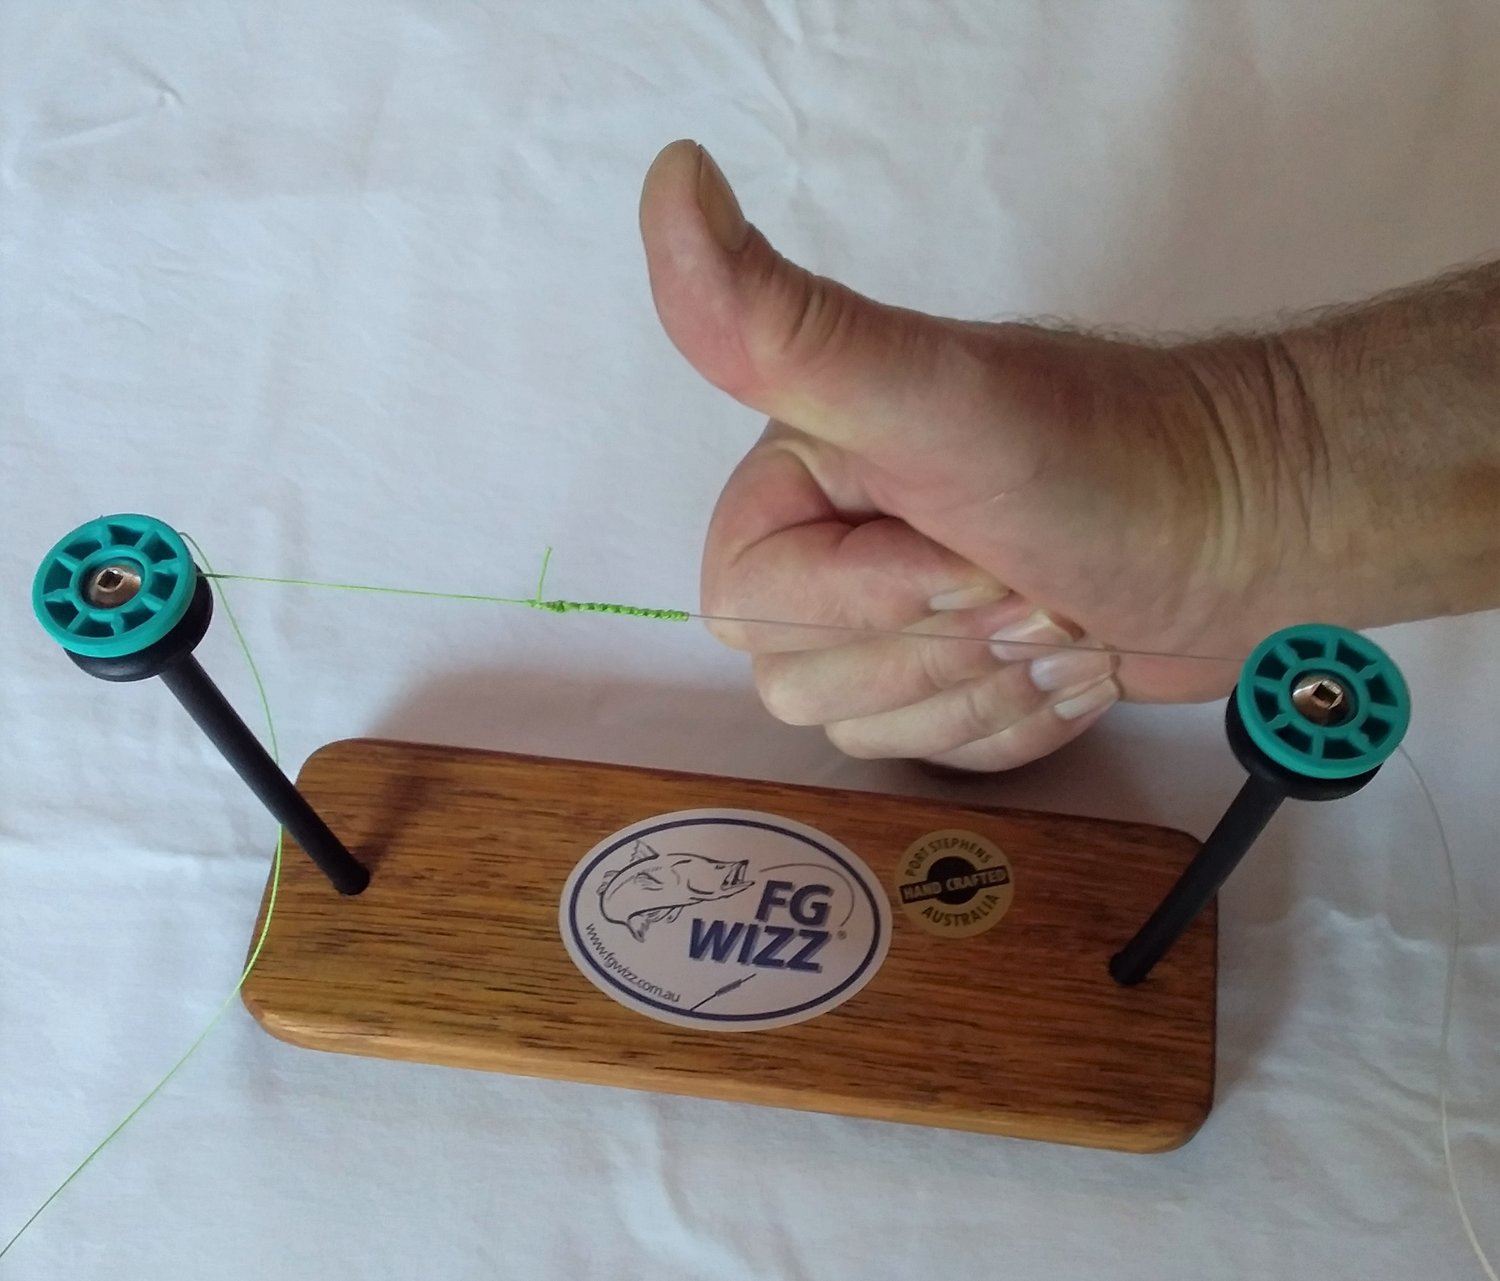 Fg Wizz Simple Tool To Make The Fg Knot Simple